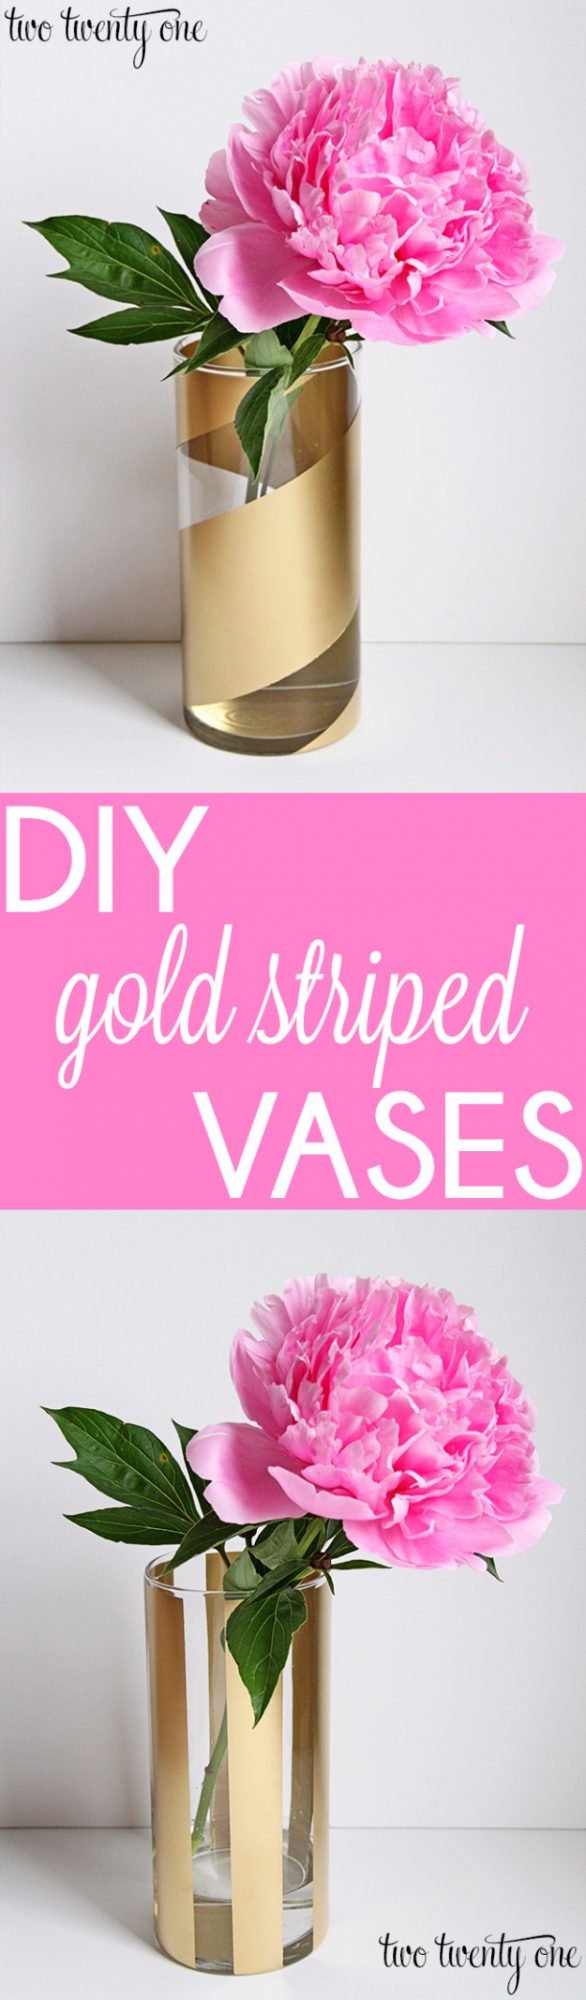 16 Simple And Easy Dollar Store Crafts You Can DIY In Under An Hour